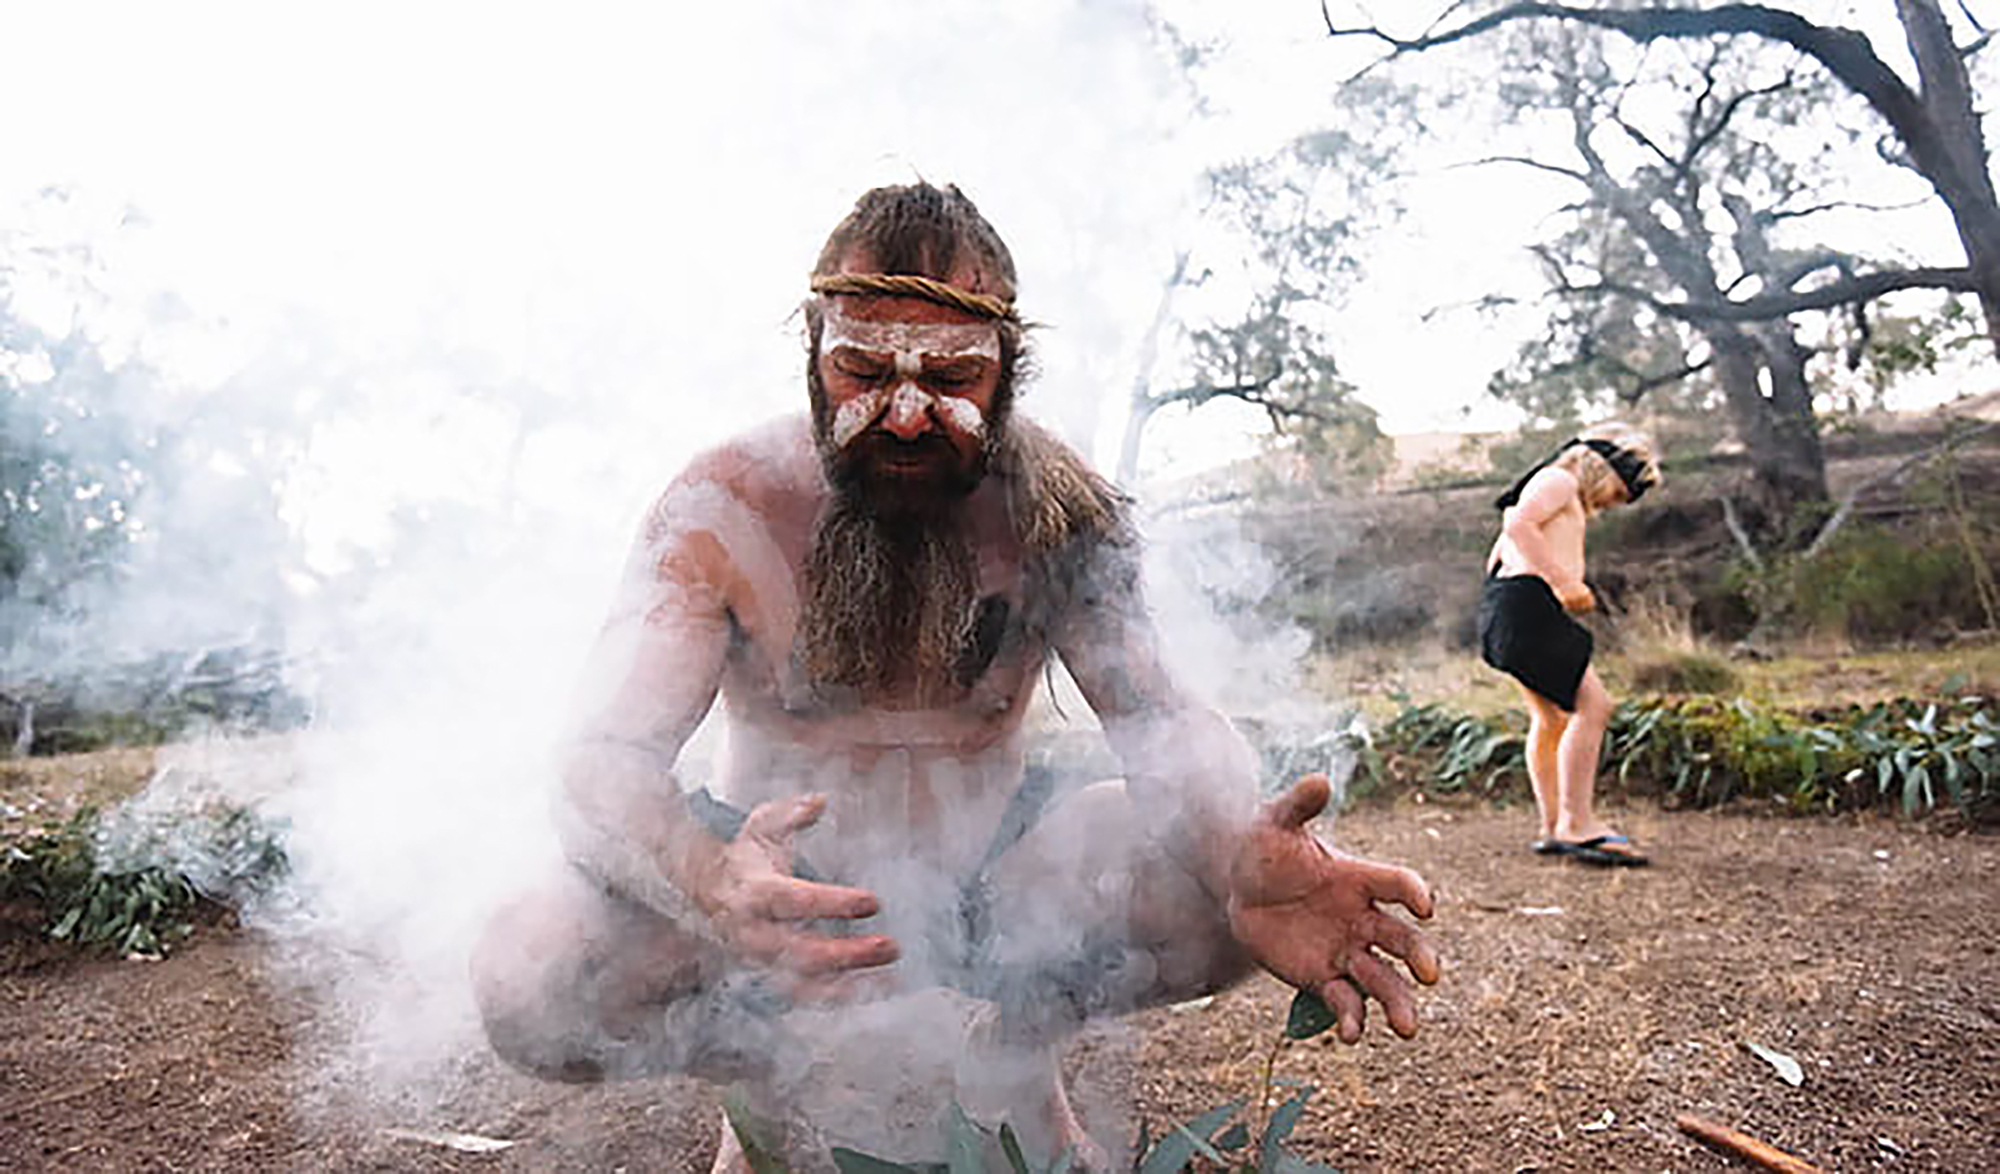 Learn about Wiradjuri culture as you journey through the Australian bush on a guided tour with Milan Dhiiyaan in Goulburn River National Park. Photo credit : Milan Dhiiyaan